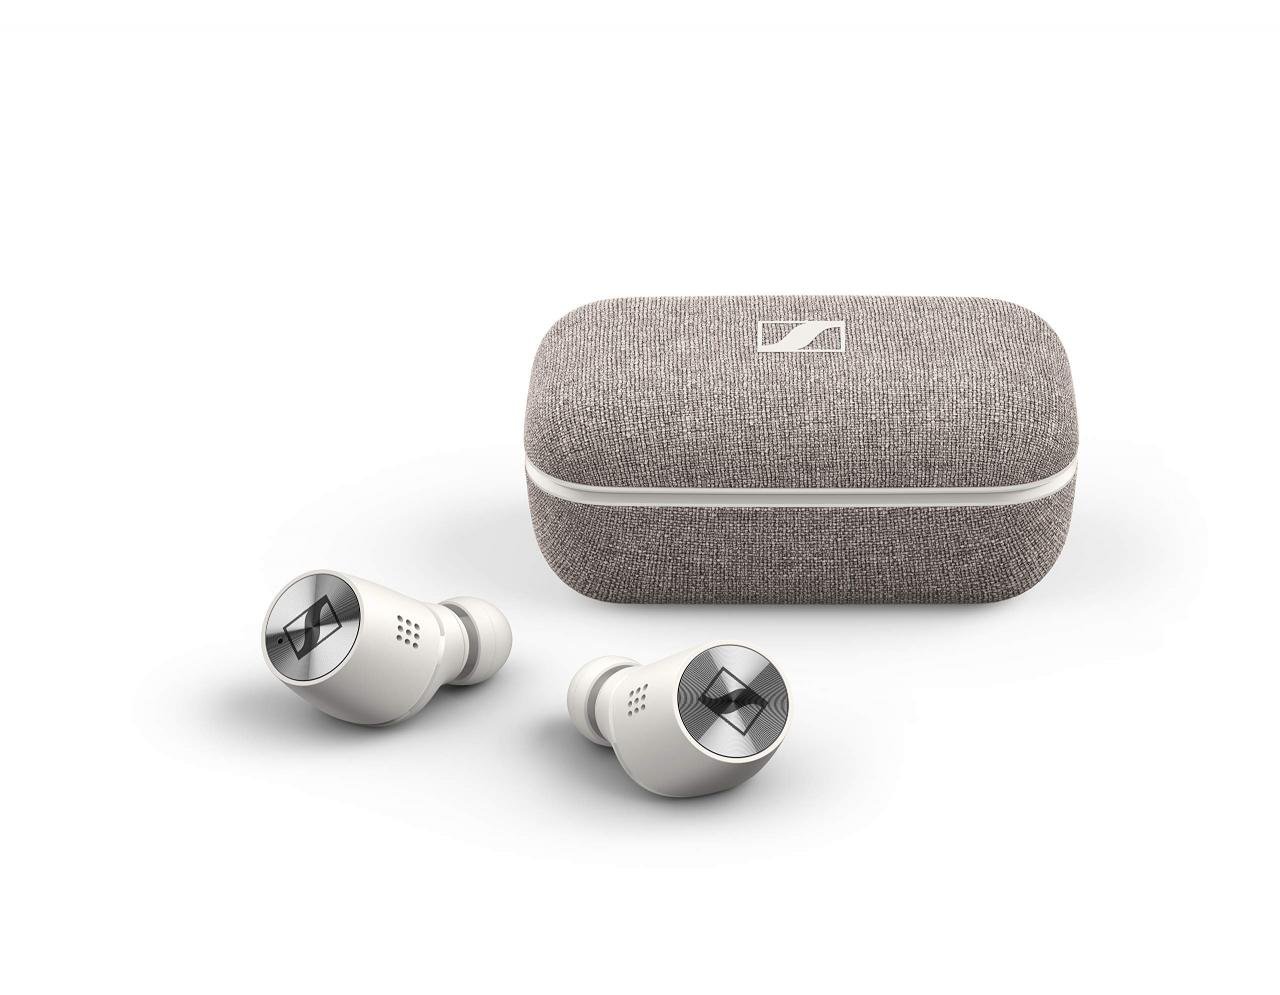 Sennheiser Momentum True Wireless 2 Bluetooth Earbuds With Active Noise Cancellation